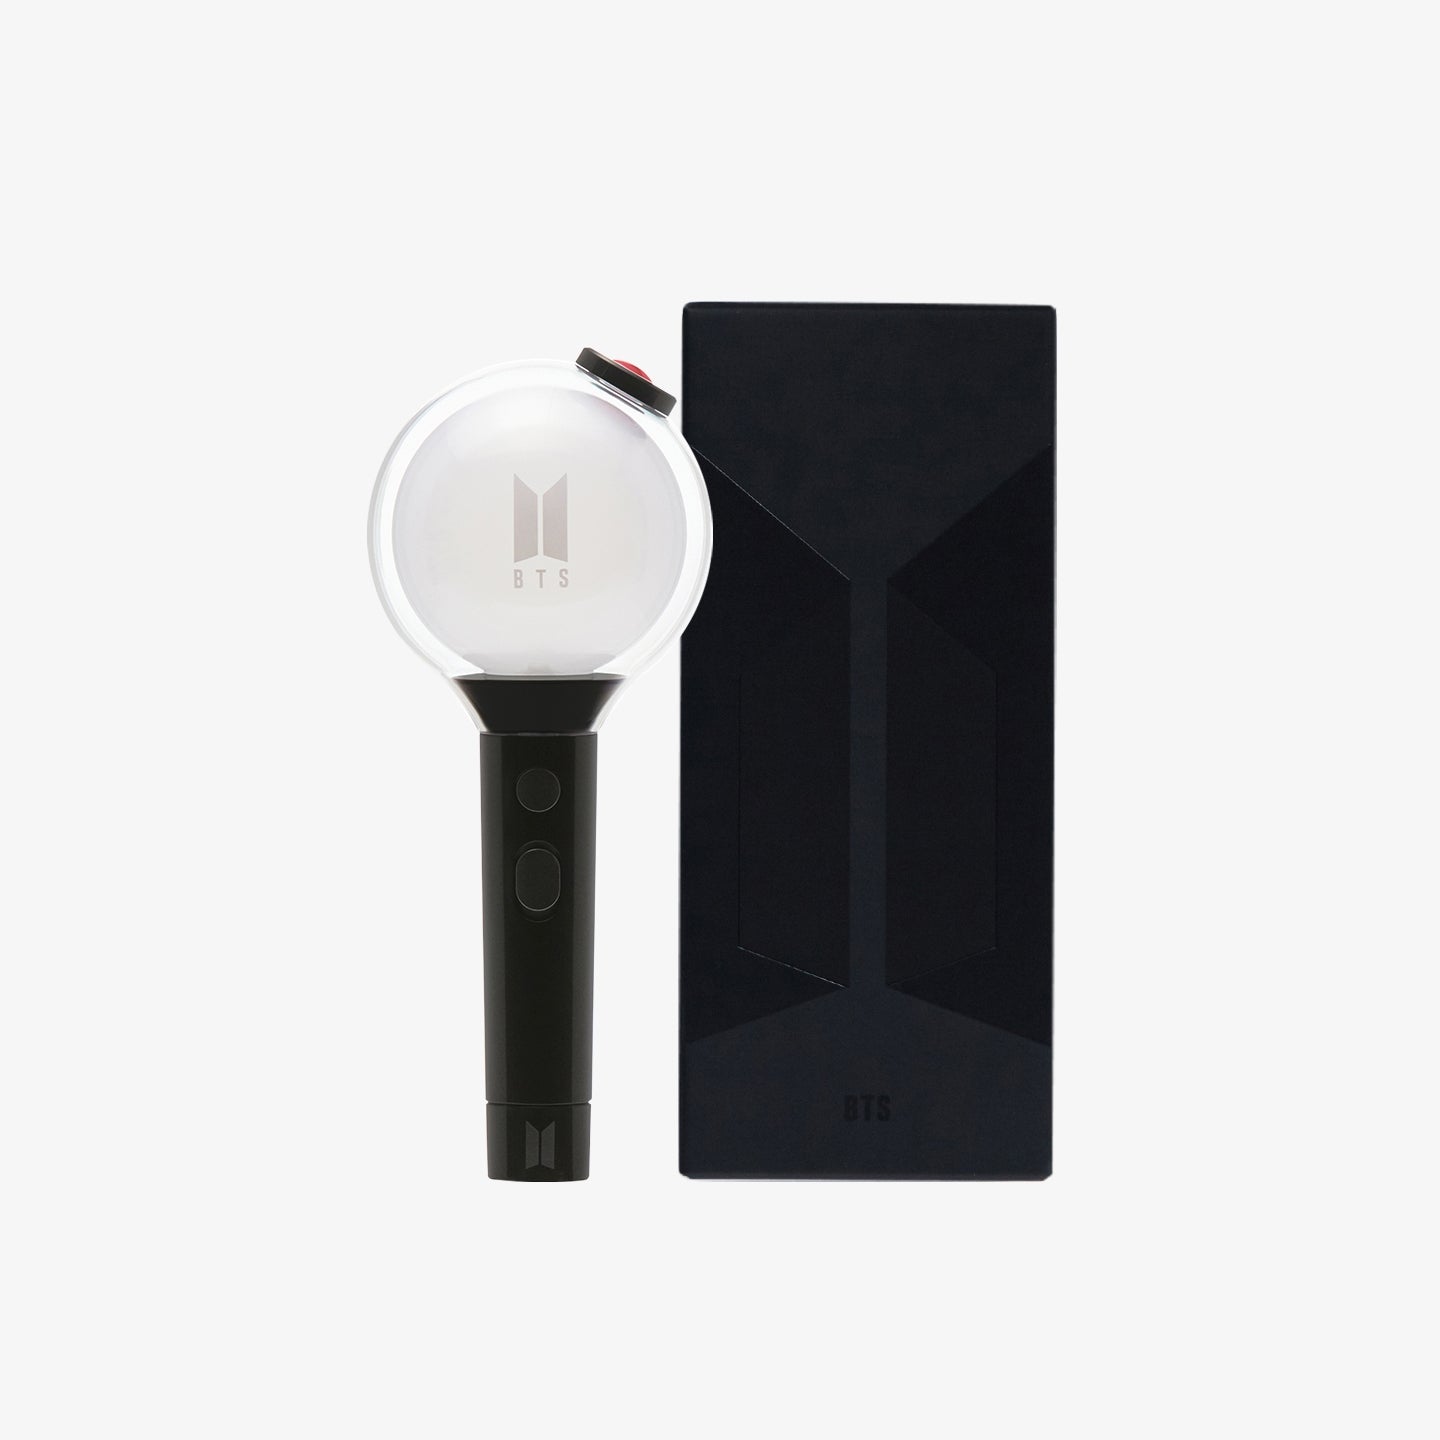 BTS - Army Bomb "Map of the soul" Special Edition